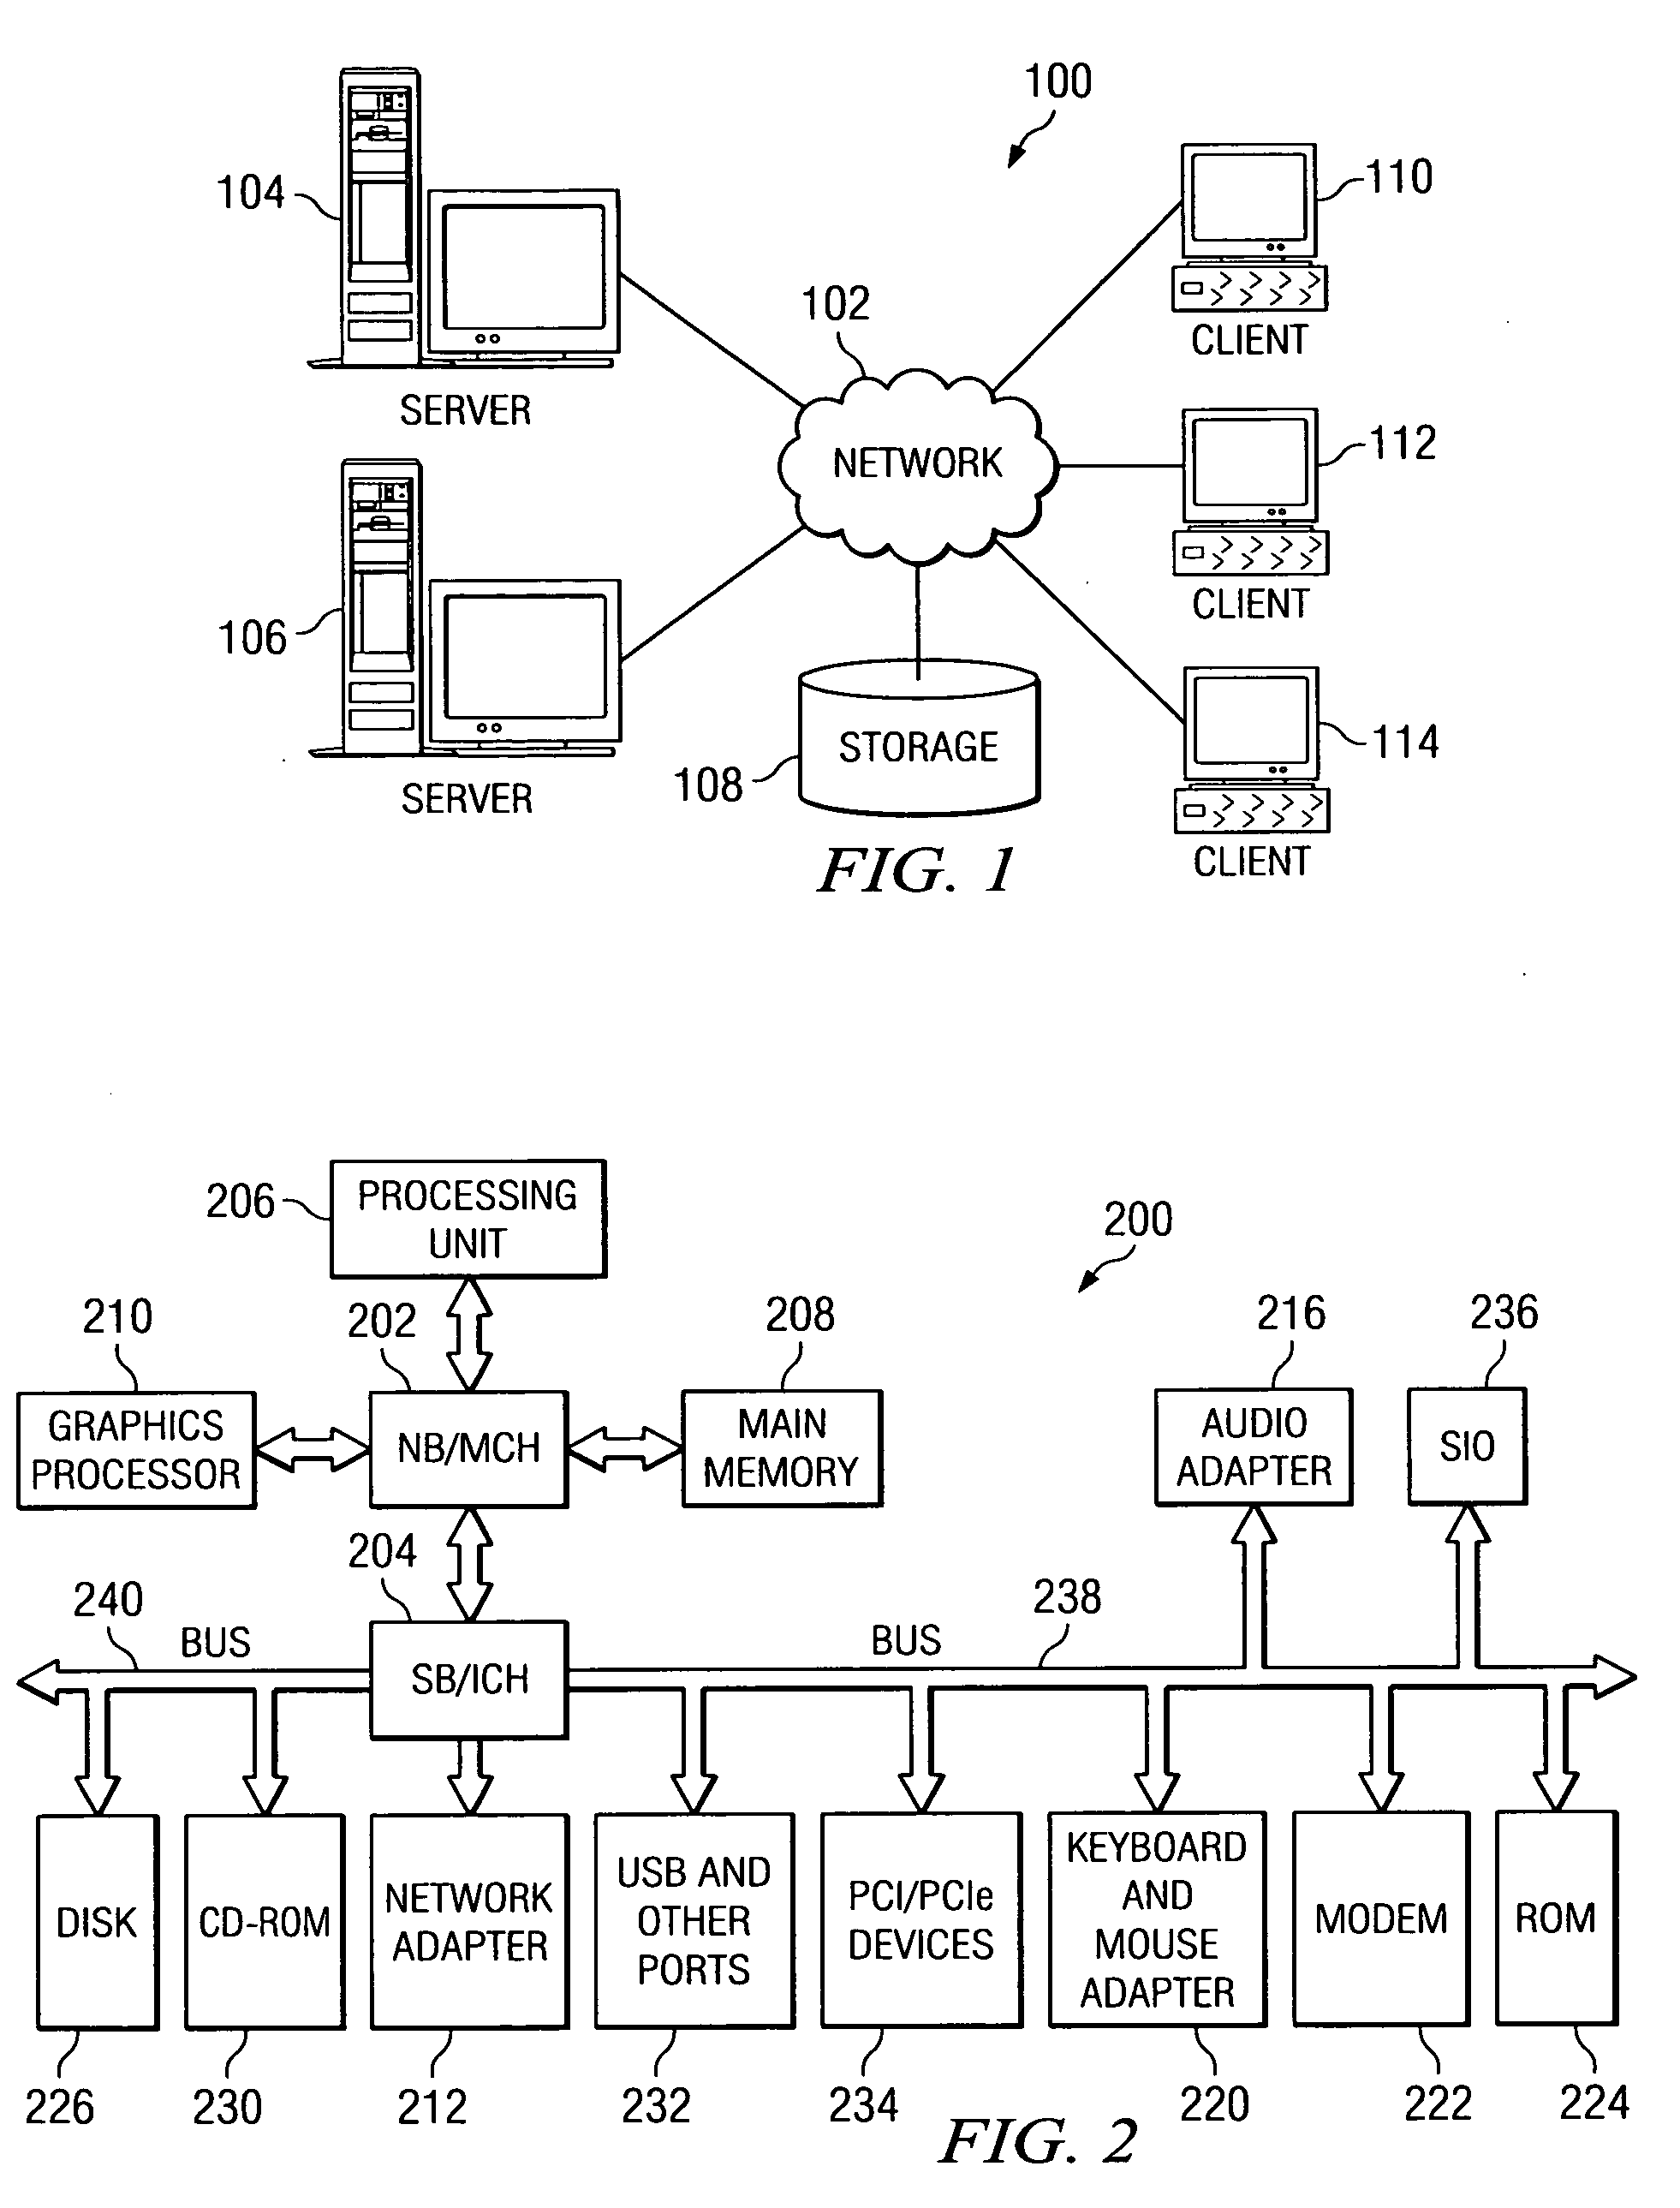 Method for correcting a received electronic mail having an erroneous header